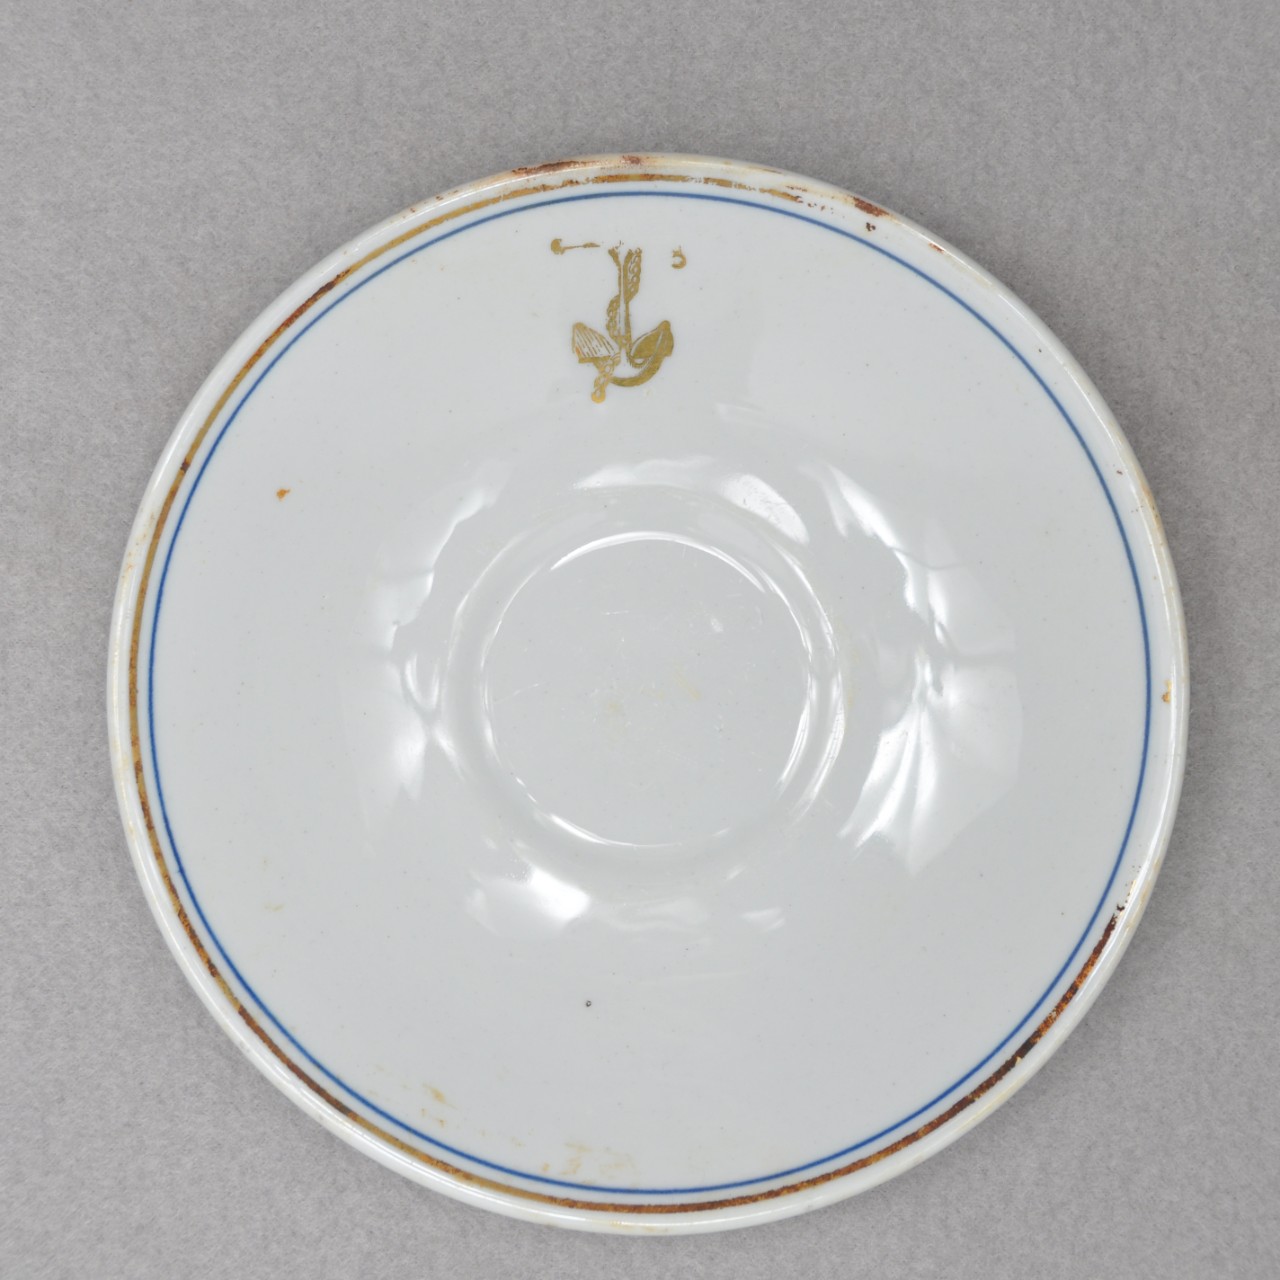 <p>A small, white ceramic saucer with a gold and blue ring around the rim. There is also a gold anchor with a chain wrapped around it located on the lip. On one side of the plate is a small crack.</p>